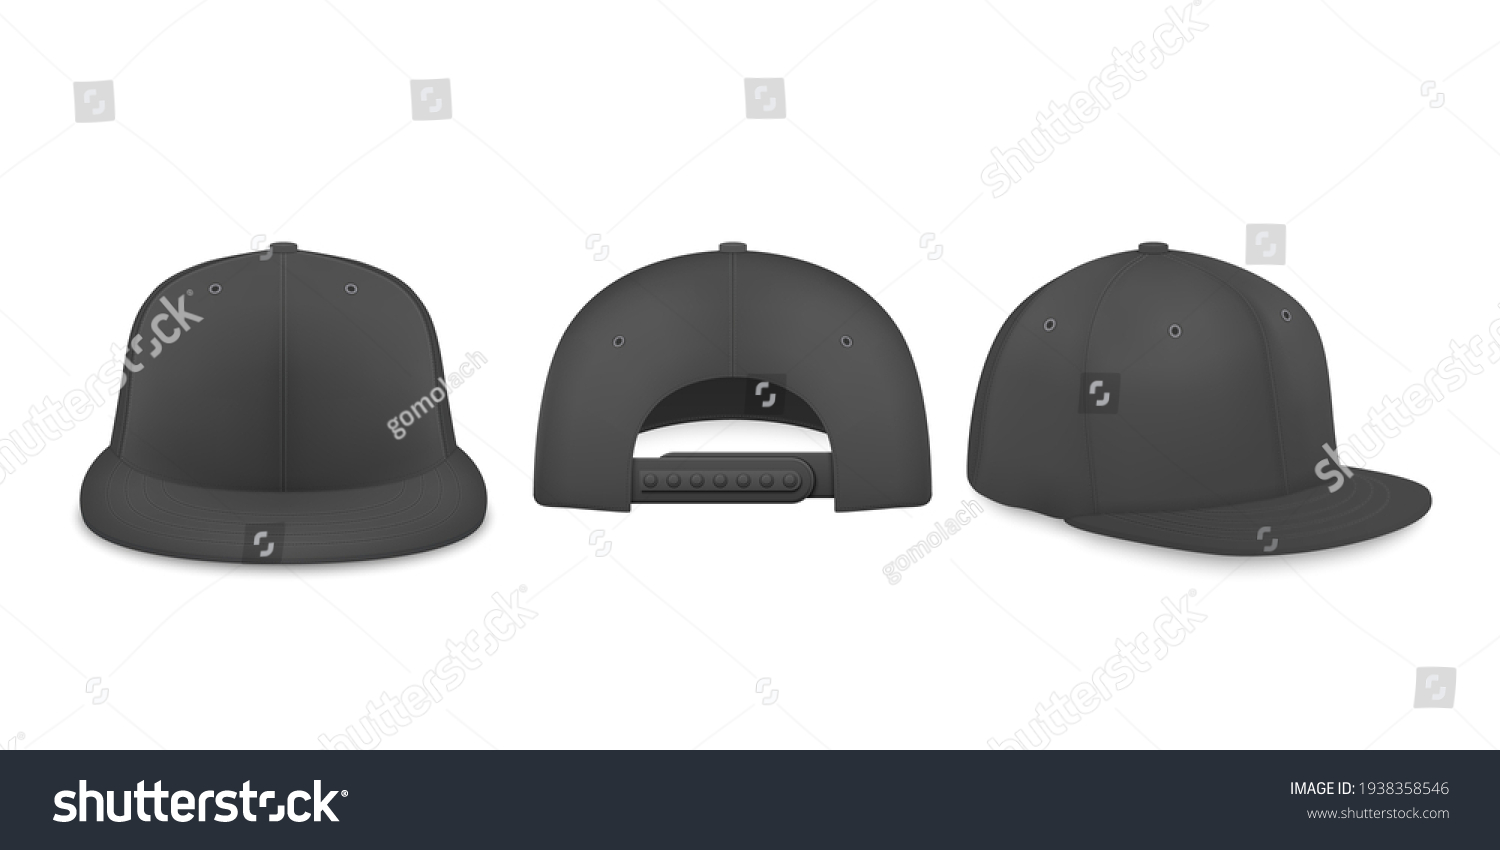 SVG of Vector 3d Realistic Black Blank Baseball Cap, Snapback Cap Icon Set Closeup Isolated on White Background. Design Template, Mock-up for Branding, Advertise. Front, Back, Side View svg